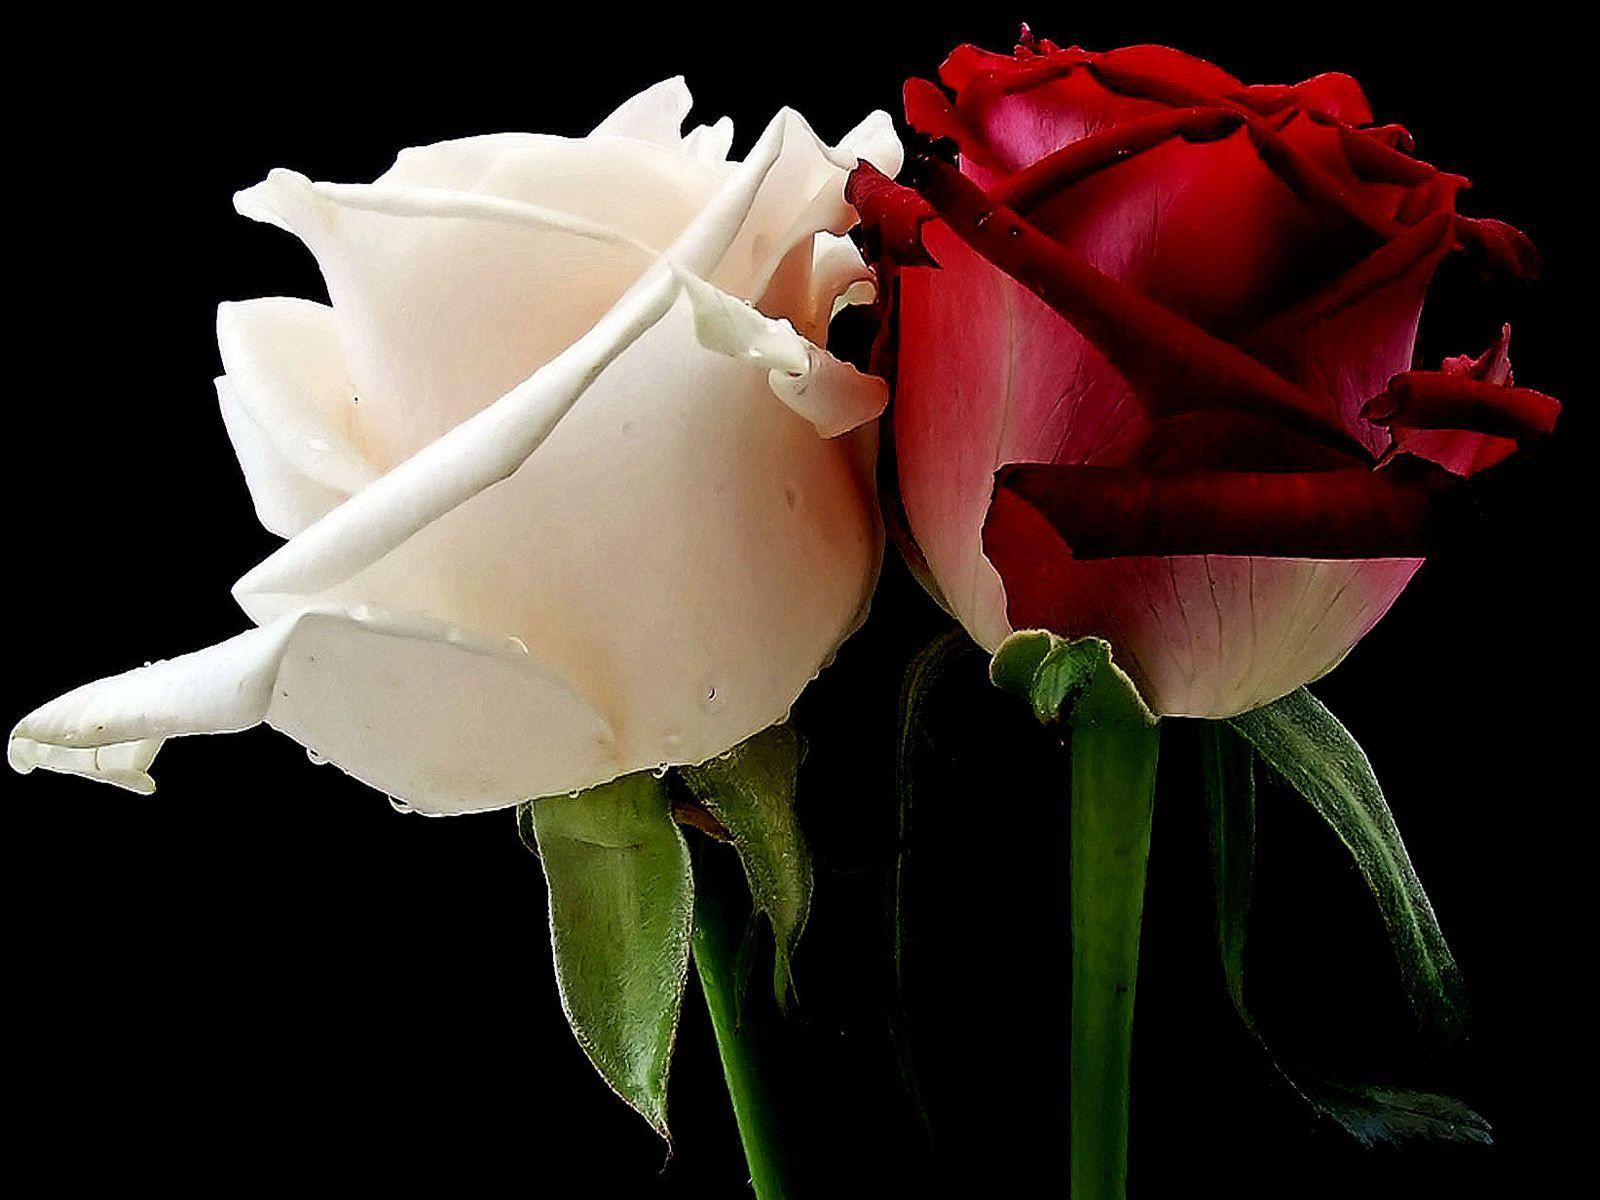 Red And White Rose Bouquets.. red and white roses, especially